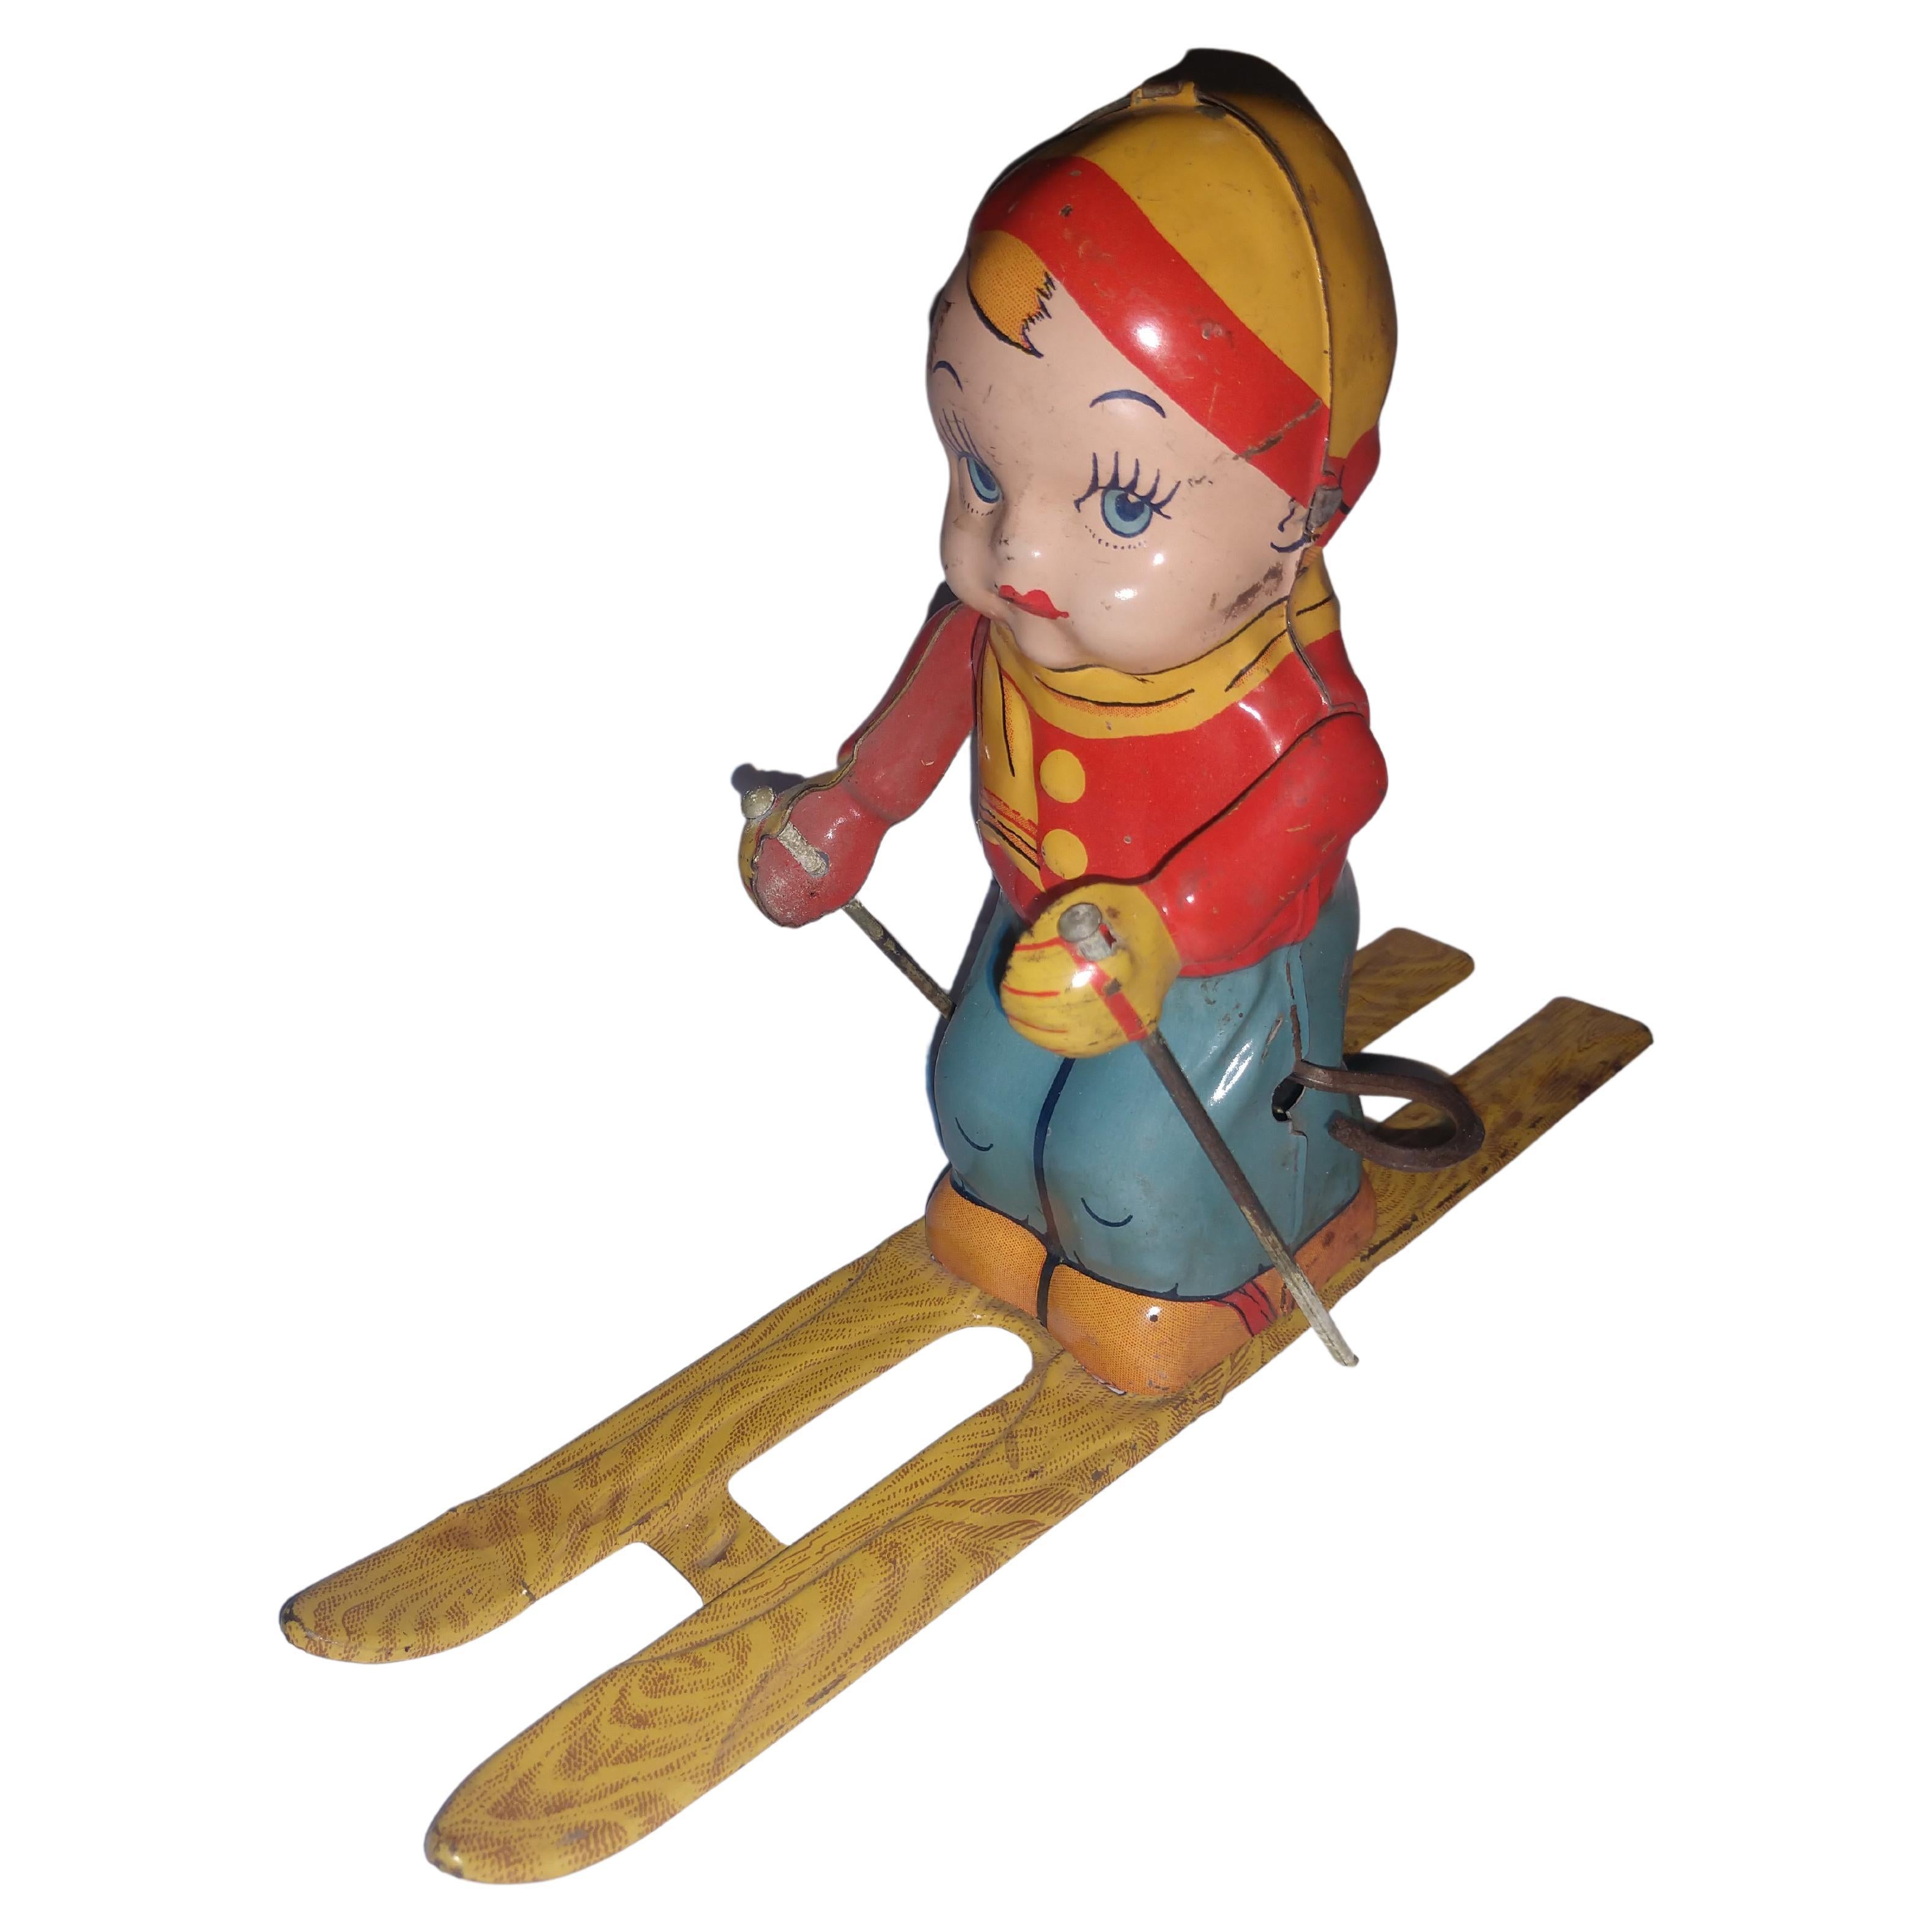 Tin Litho Windup Toy Skier Girl by Chein C1945